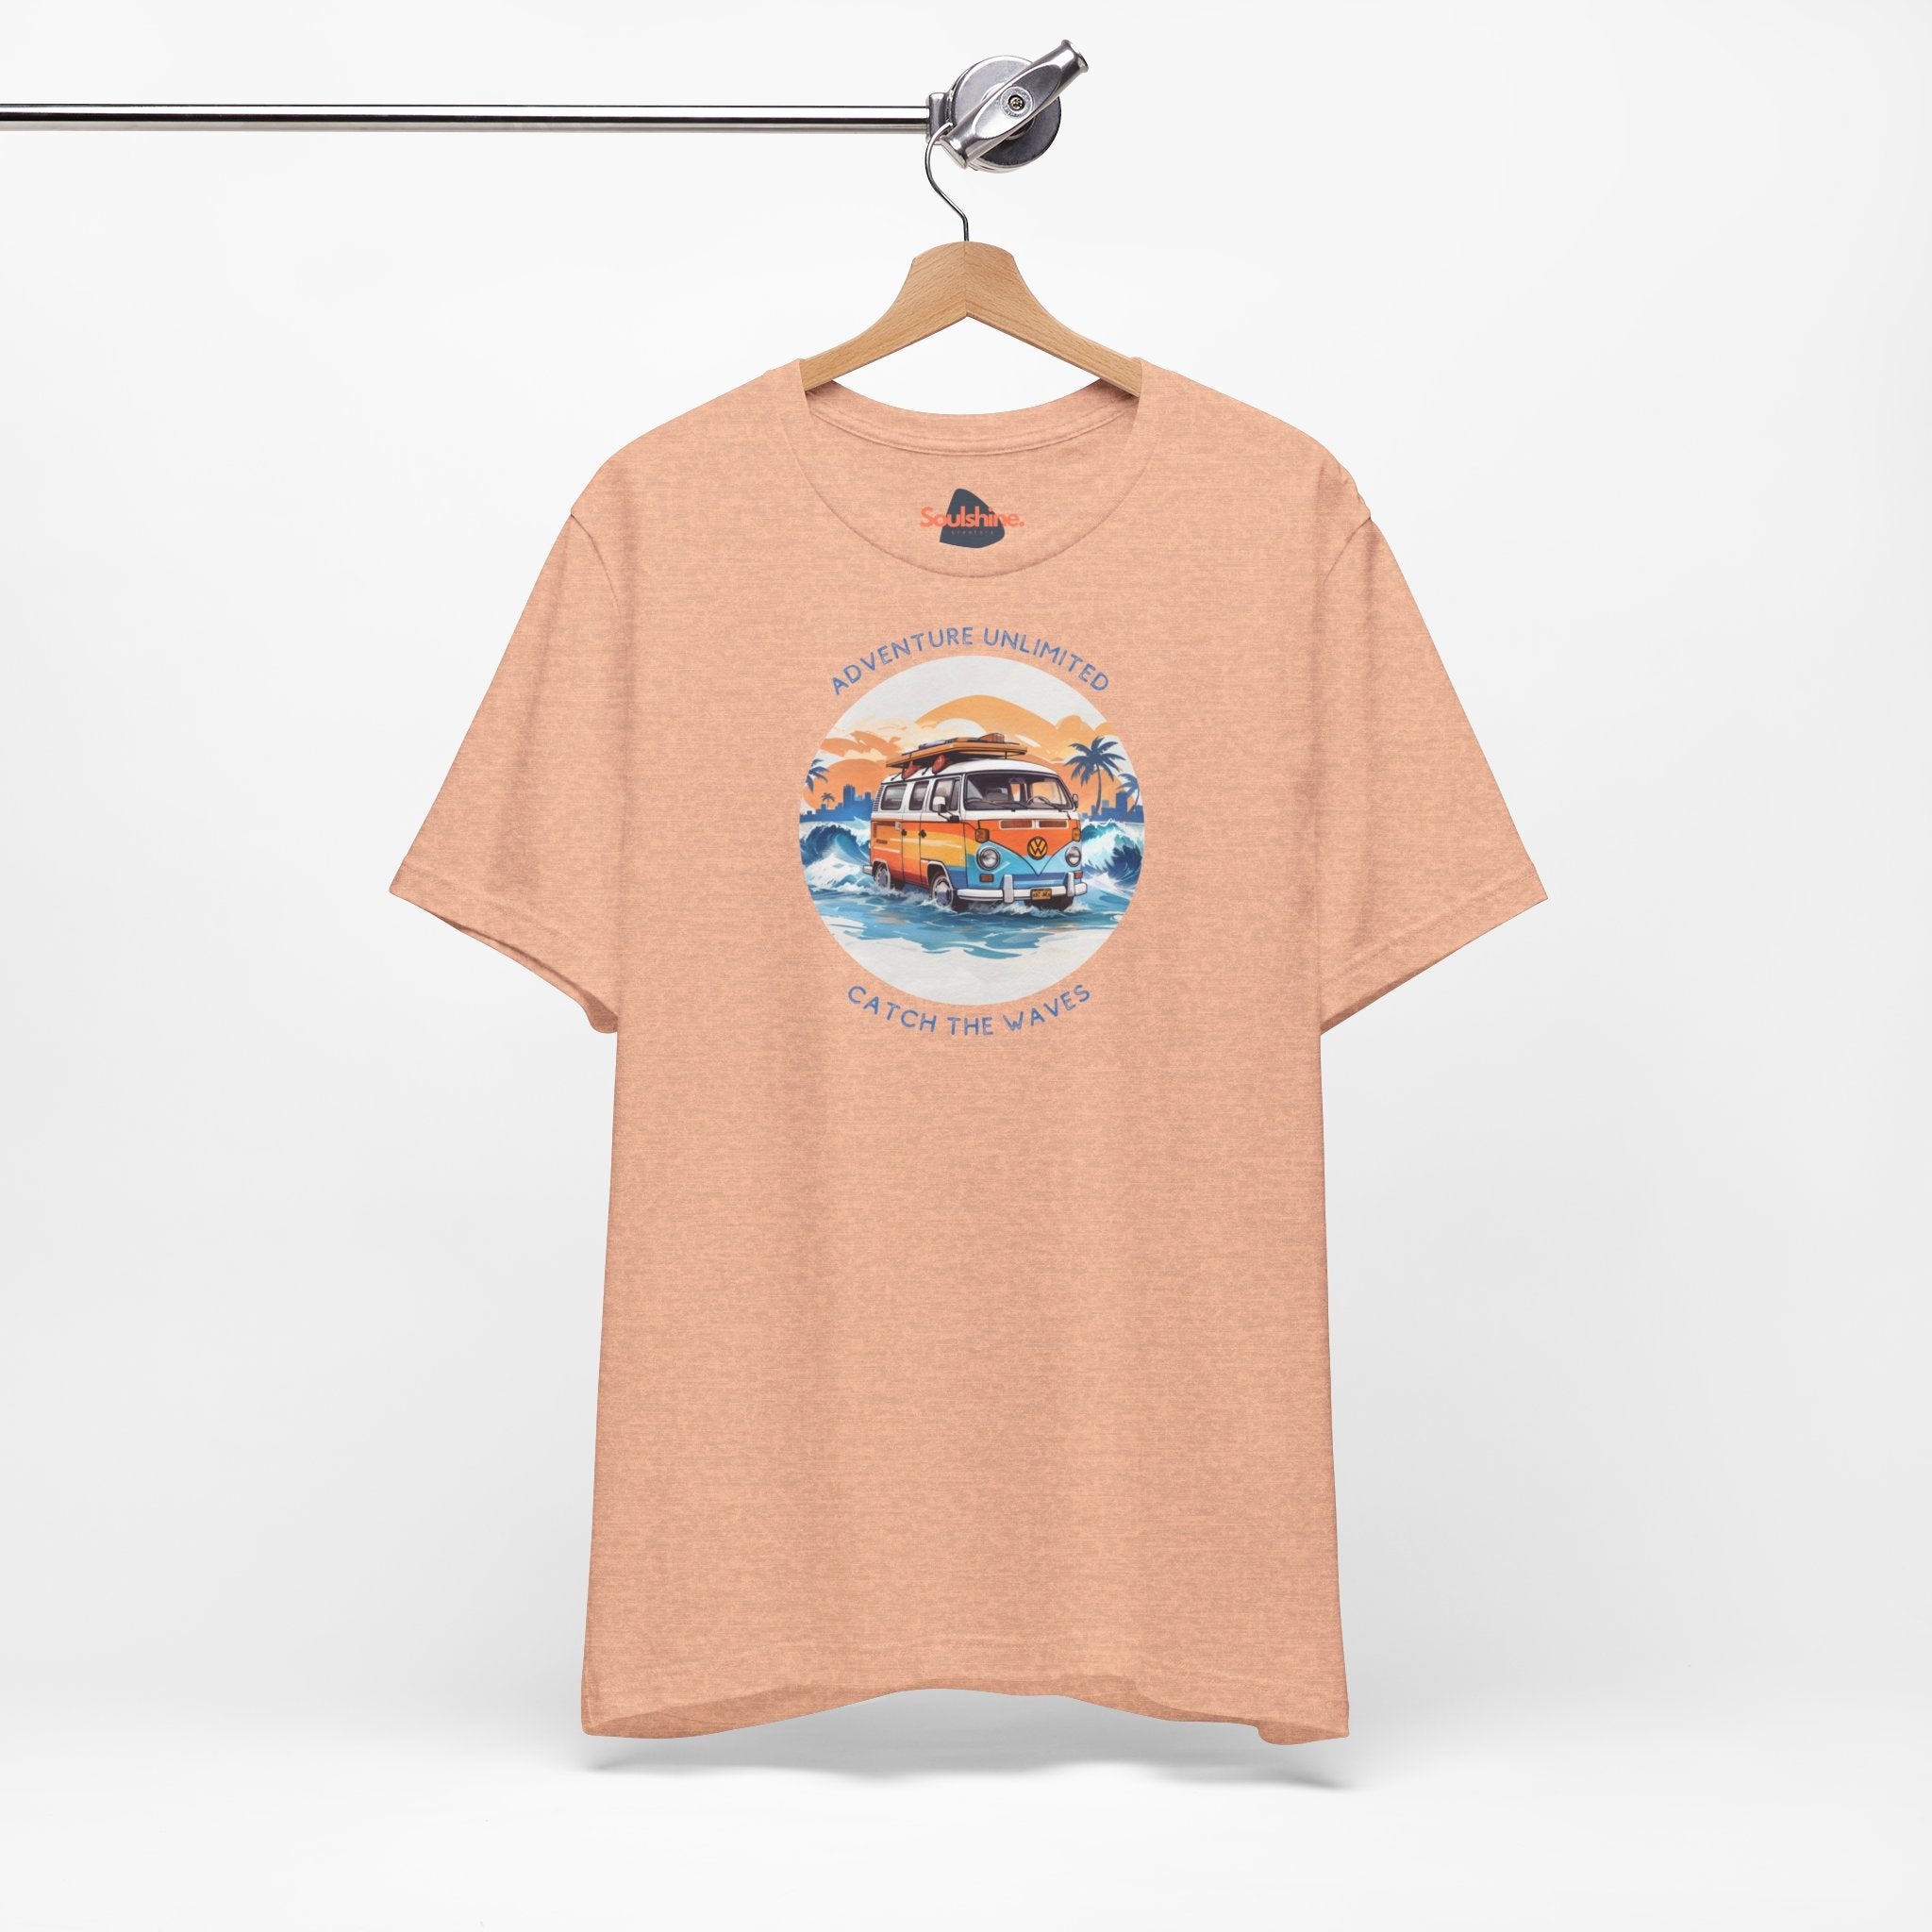 Adventure Unlimited Surfing T-Shirt with Boat and Sunset Graphic - Direct-to-Garment Printed Item by Bella & Canvas EU